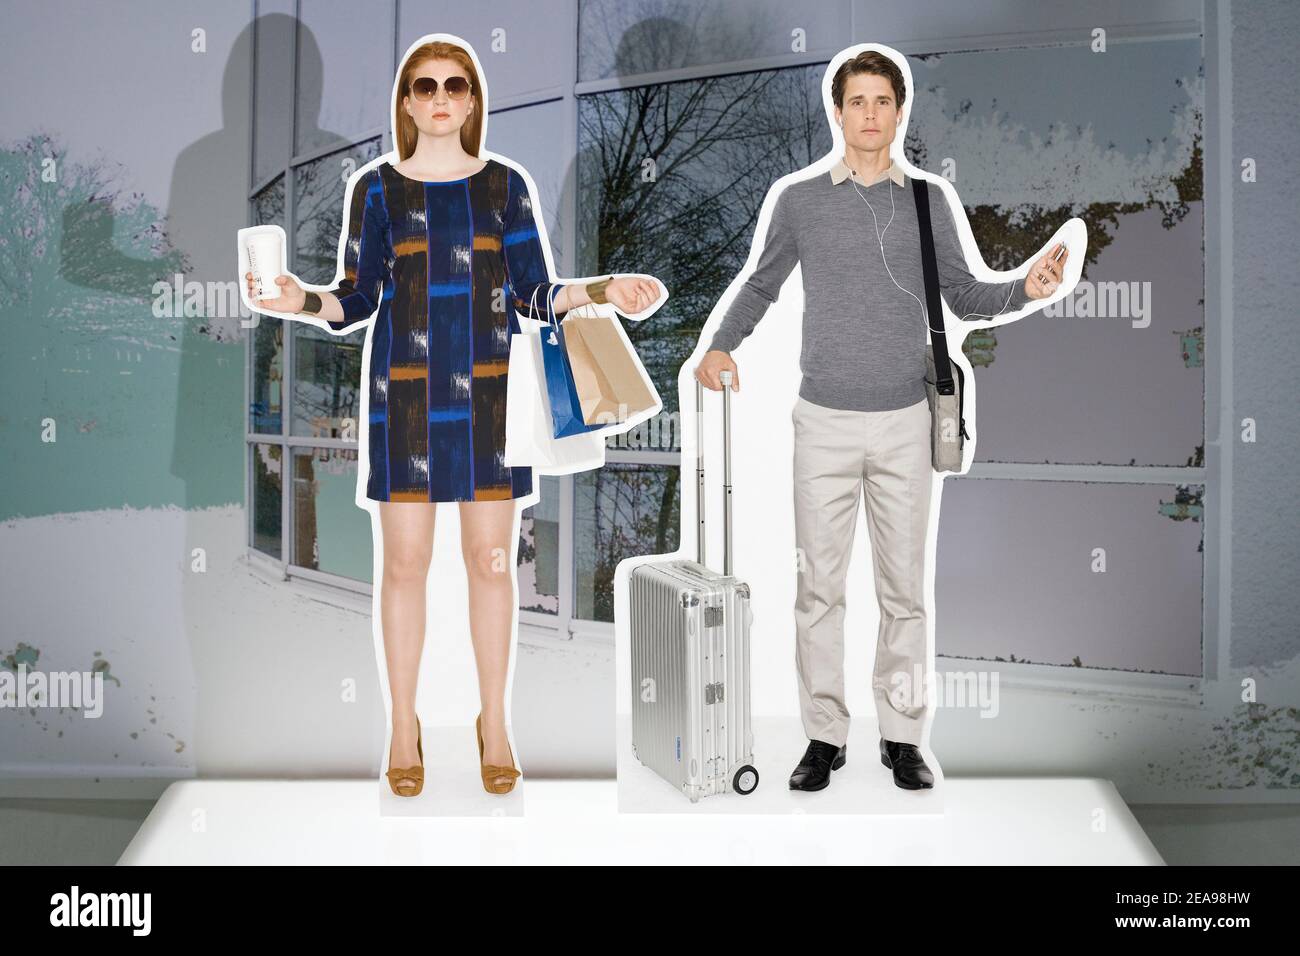 Man and woman, cut-out figures, collage, flight case, briefcase, coffee to go, shopping bags, light box, cell phone, stylized architecture Stock Photo